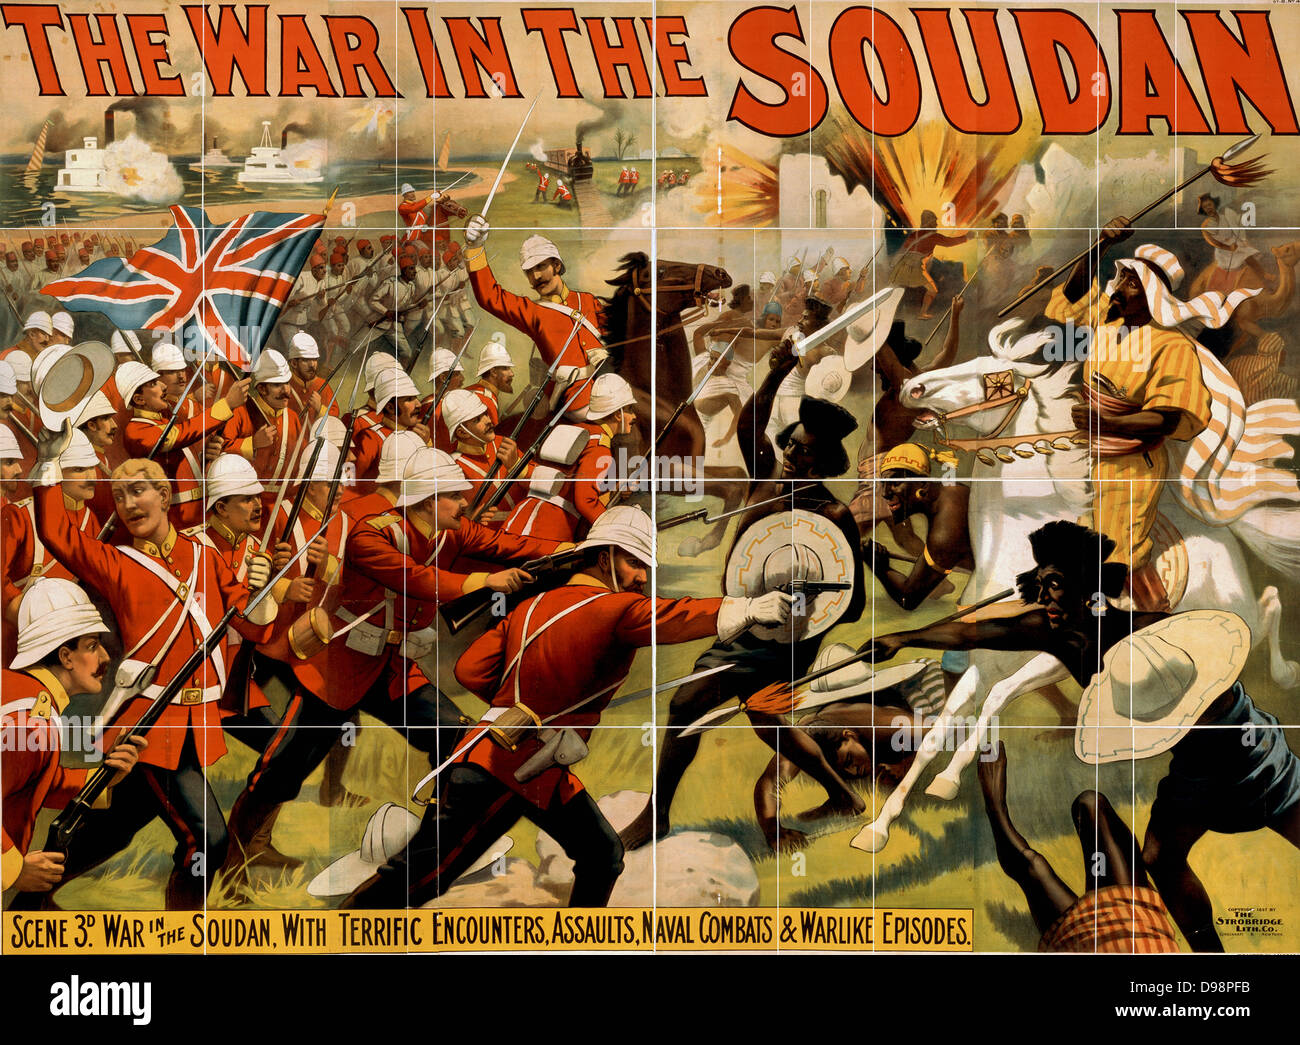 The War in the Soudan', poster for a Barnum and Bailey circus production 'The Mahdi, or, For the Victoria Cross', 1897, showing British and Mahdist troops fighting. Anglo-Sudan War (Mahdist War) 1881-1899, Northeast Africa. Stock Photo